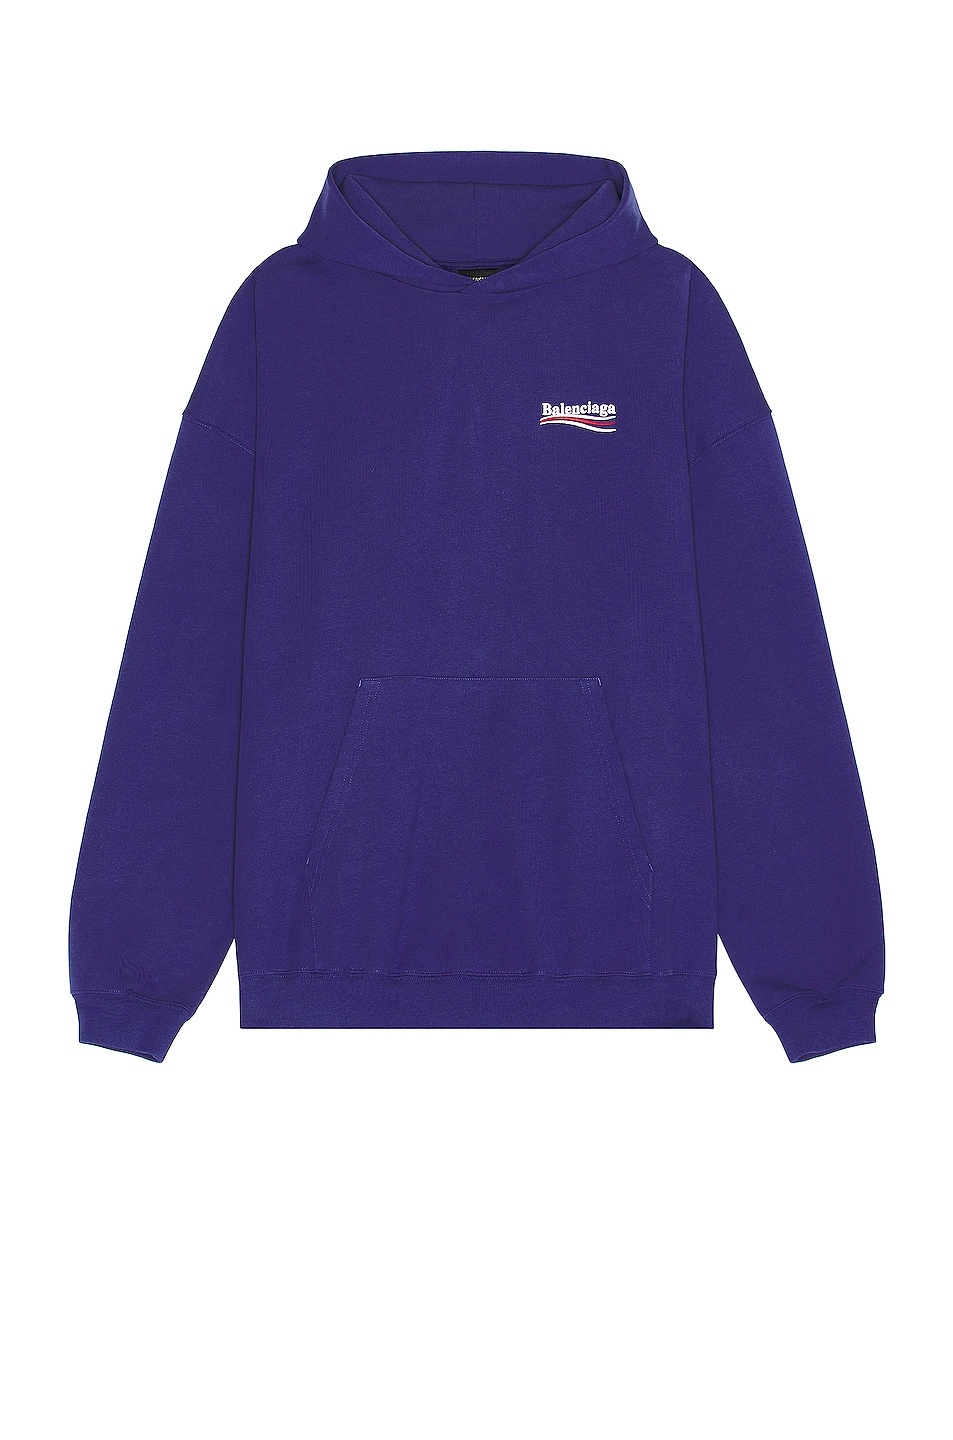 Campaign Large Fit Hoodie - 1